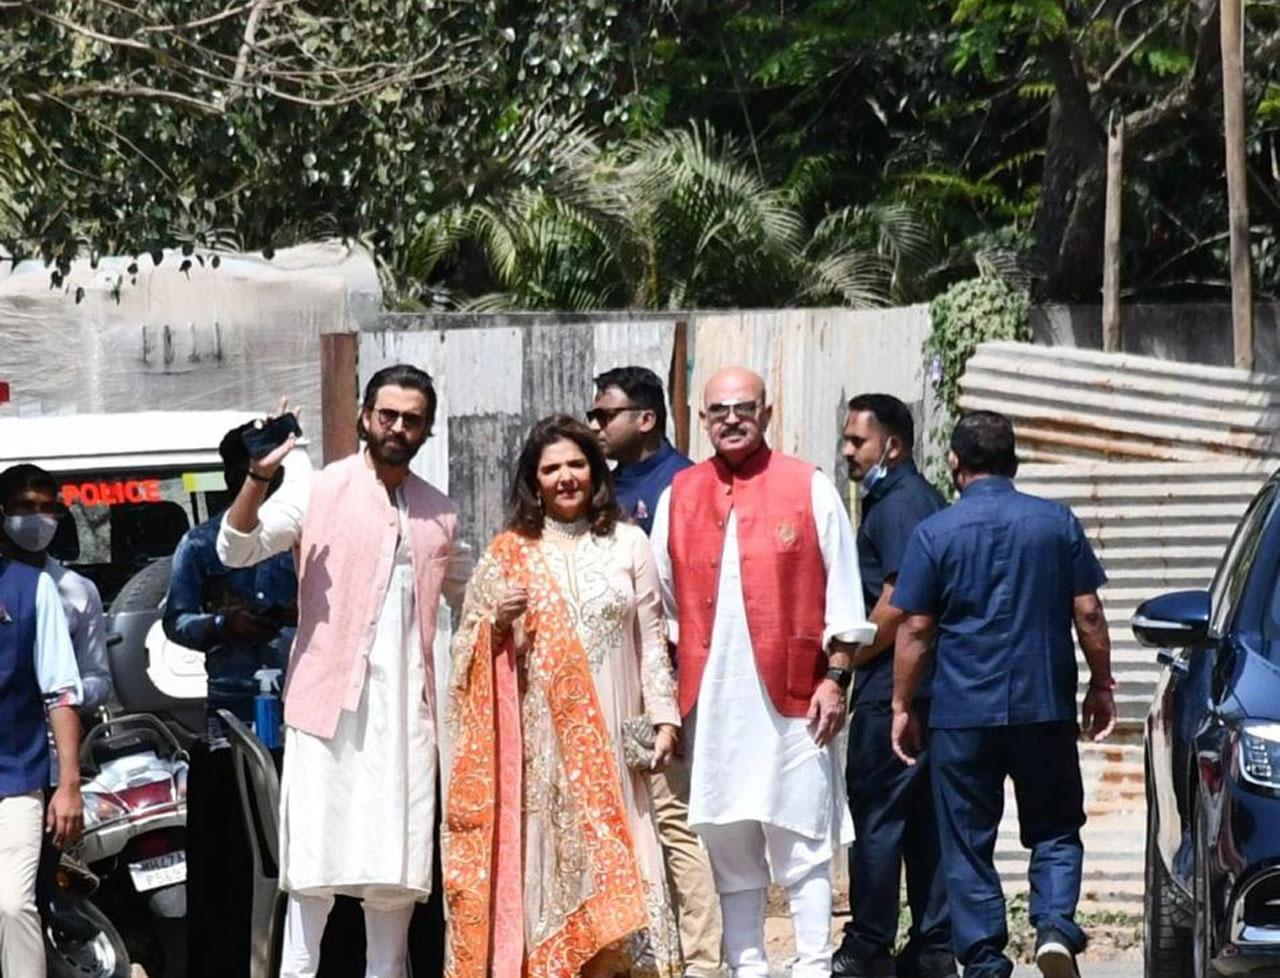 Hrithik Roshan, dapper as always, nailed his outfit for the wedding. He donned a pink Nehru jacket and white Kurta pajama. The beard only added to the aura which is his look for his next Vikram Vedha. Rakesh Roshan opted for a red Nehru jacket. The father-son duo struck a stylish pose with Pinkie Roshan 